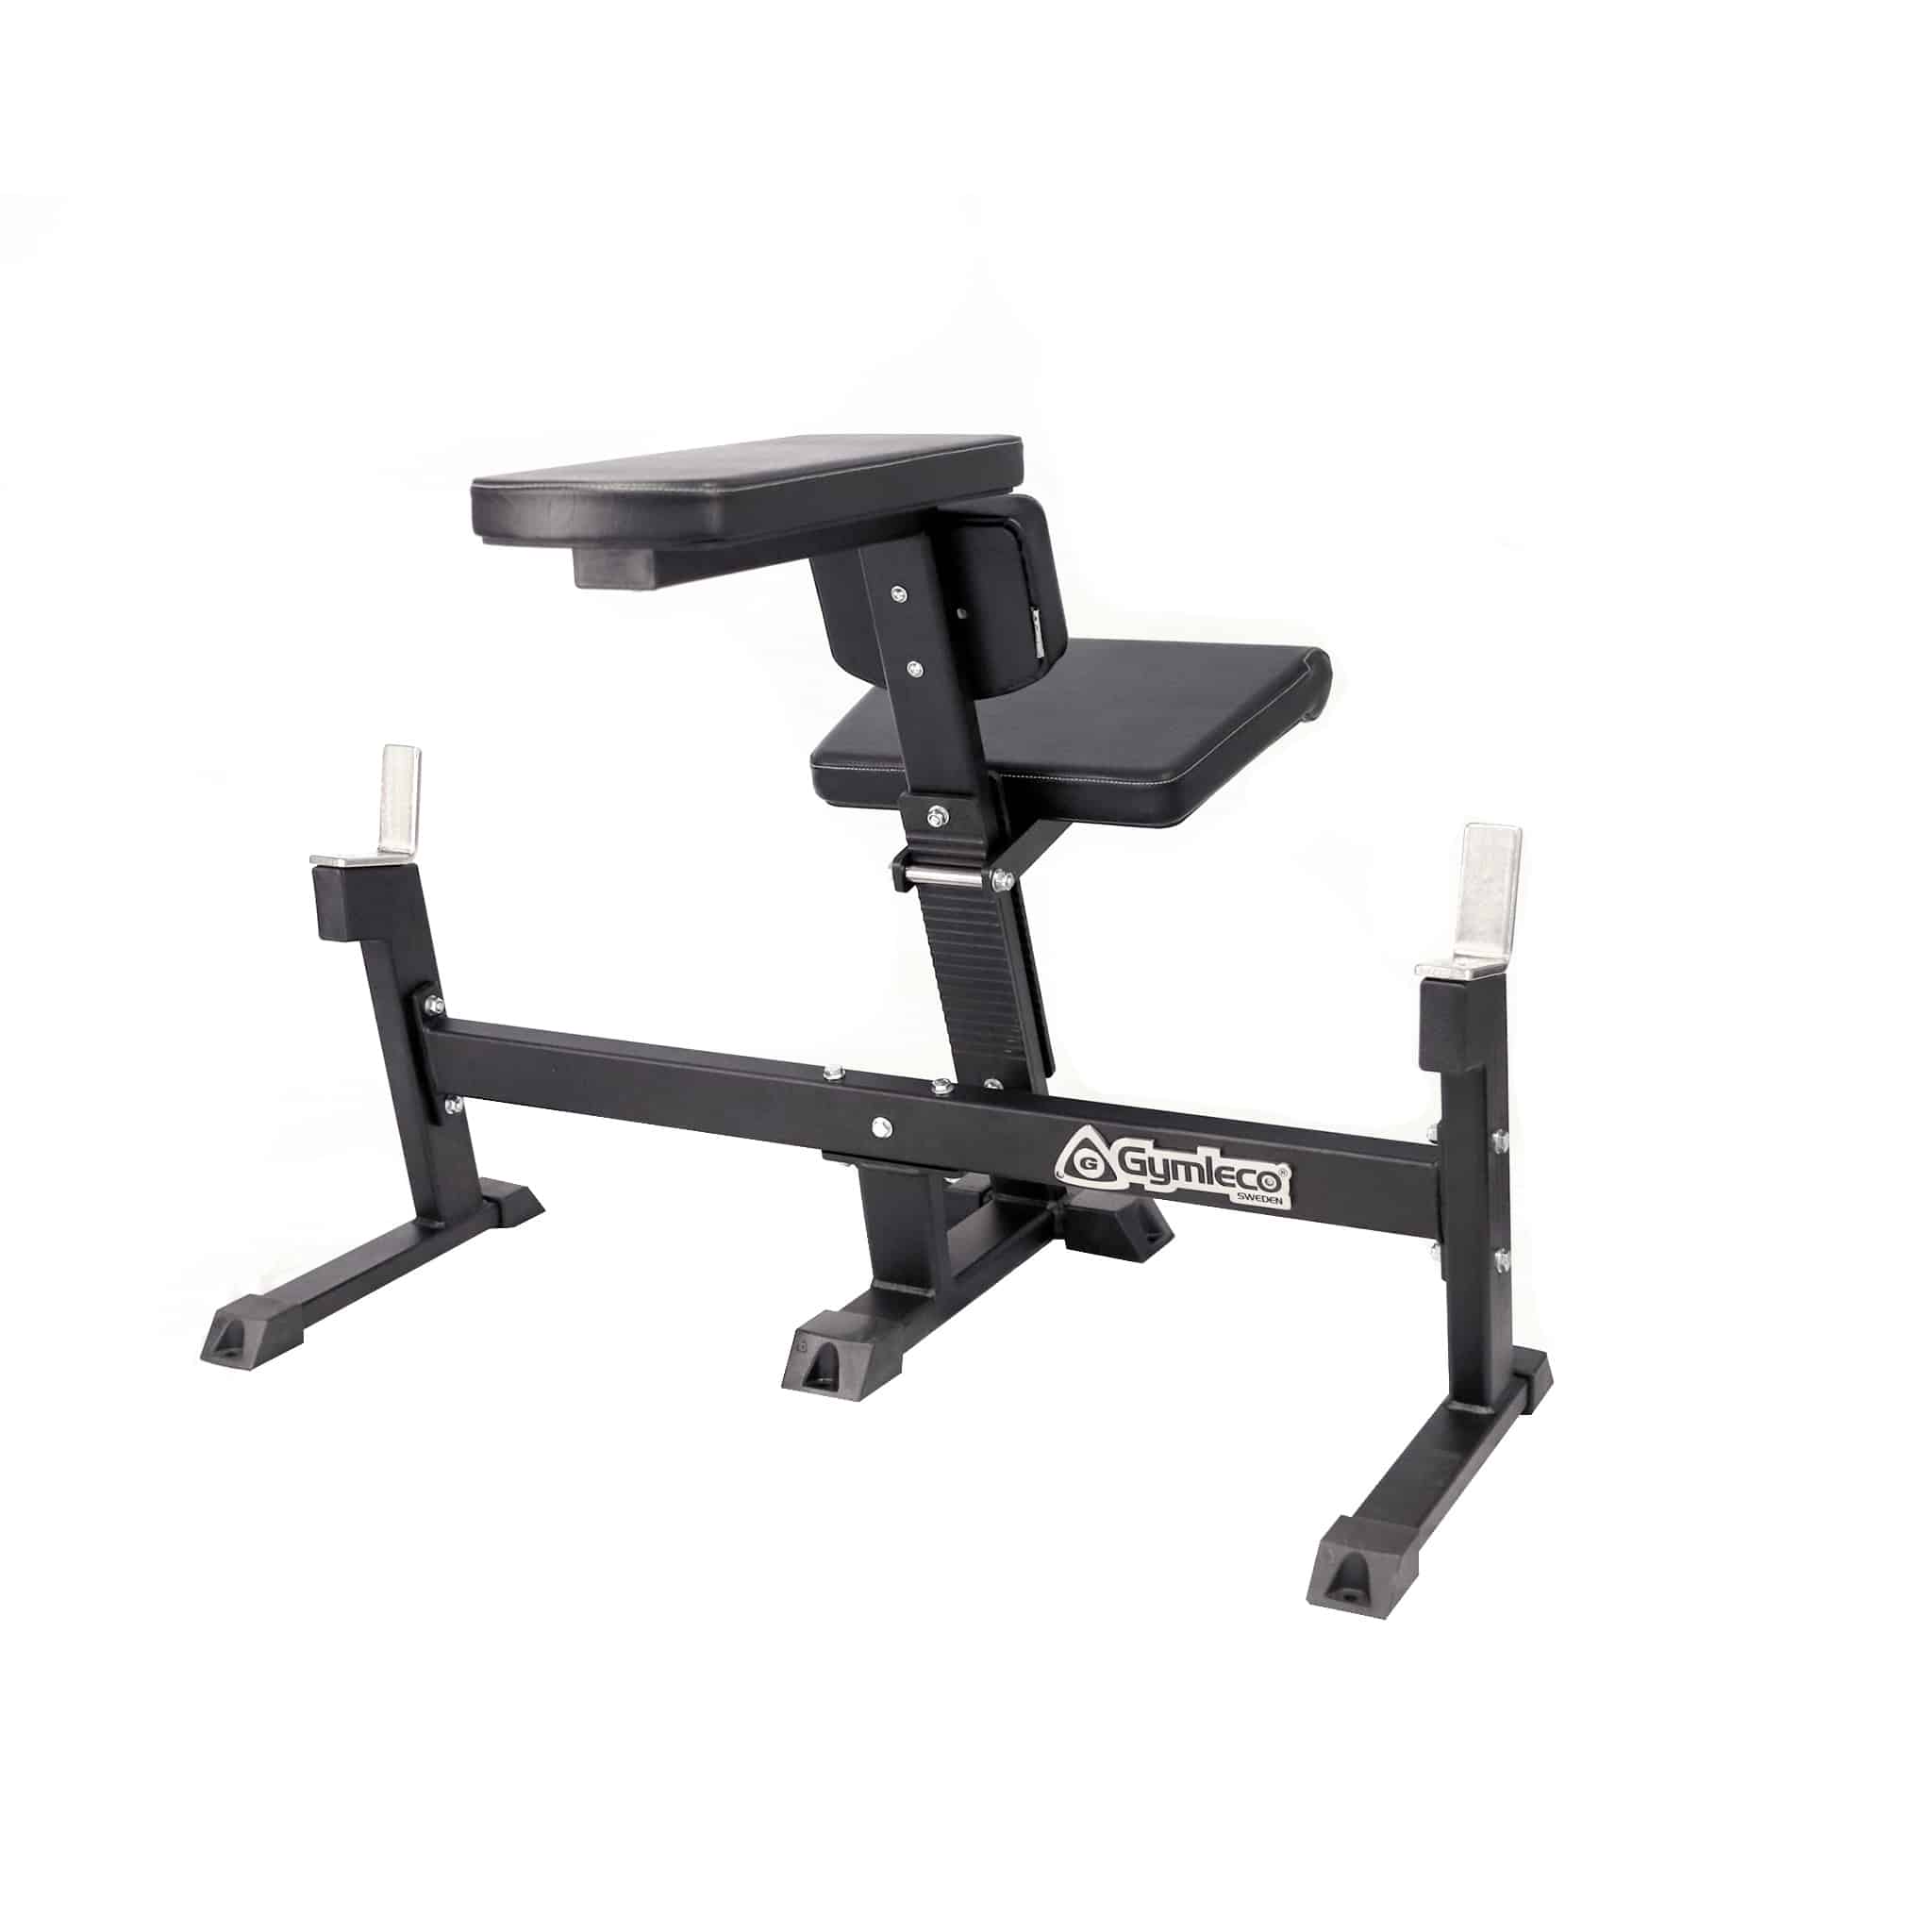 118 Seal Row Bench Open Model from Gymleco